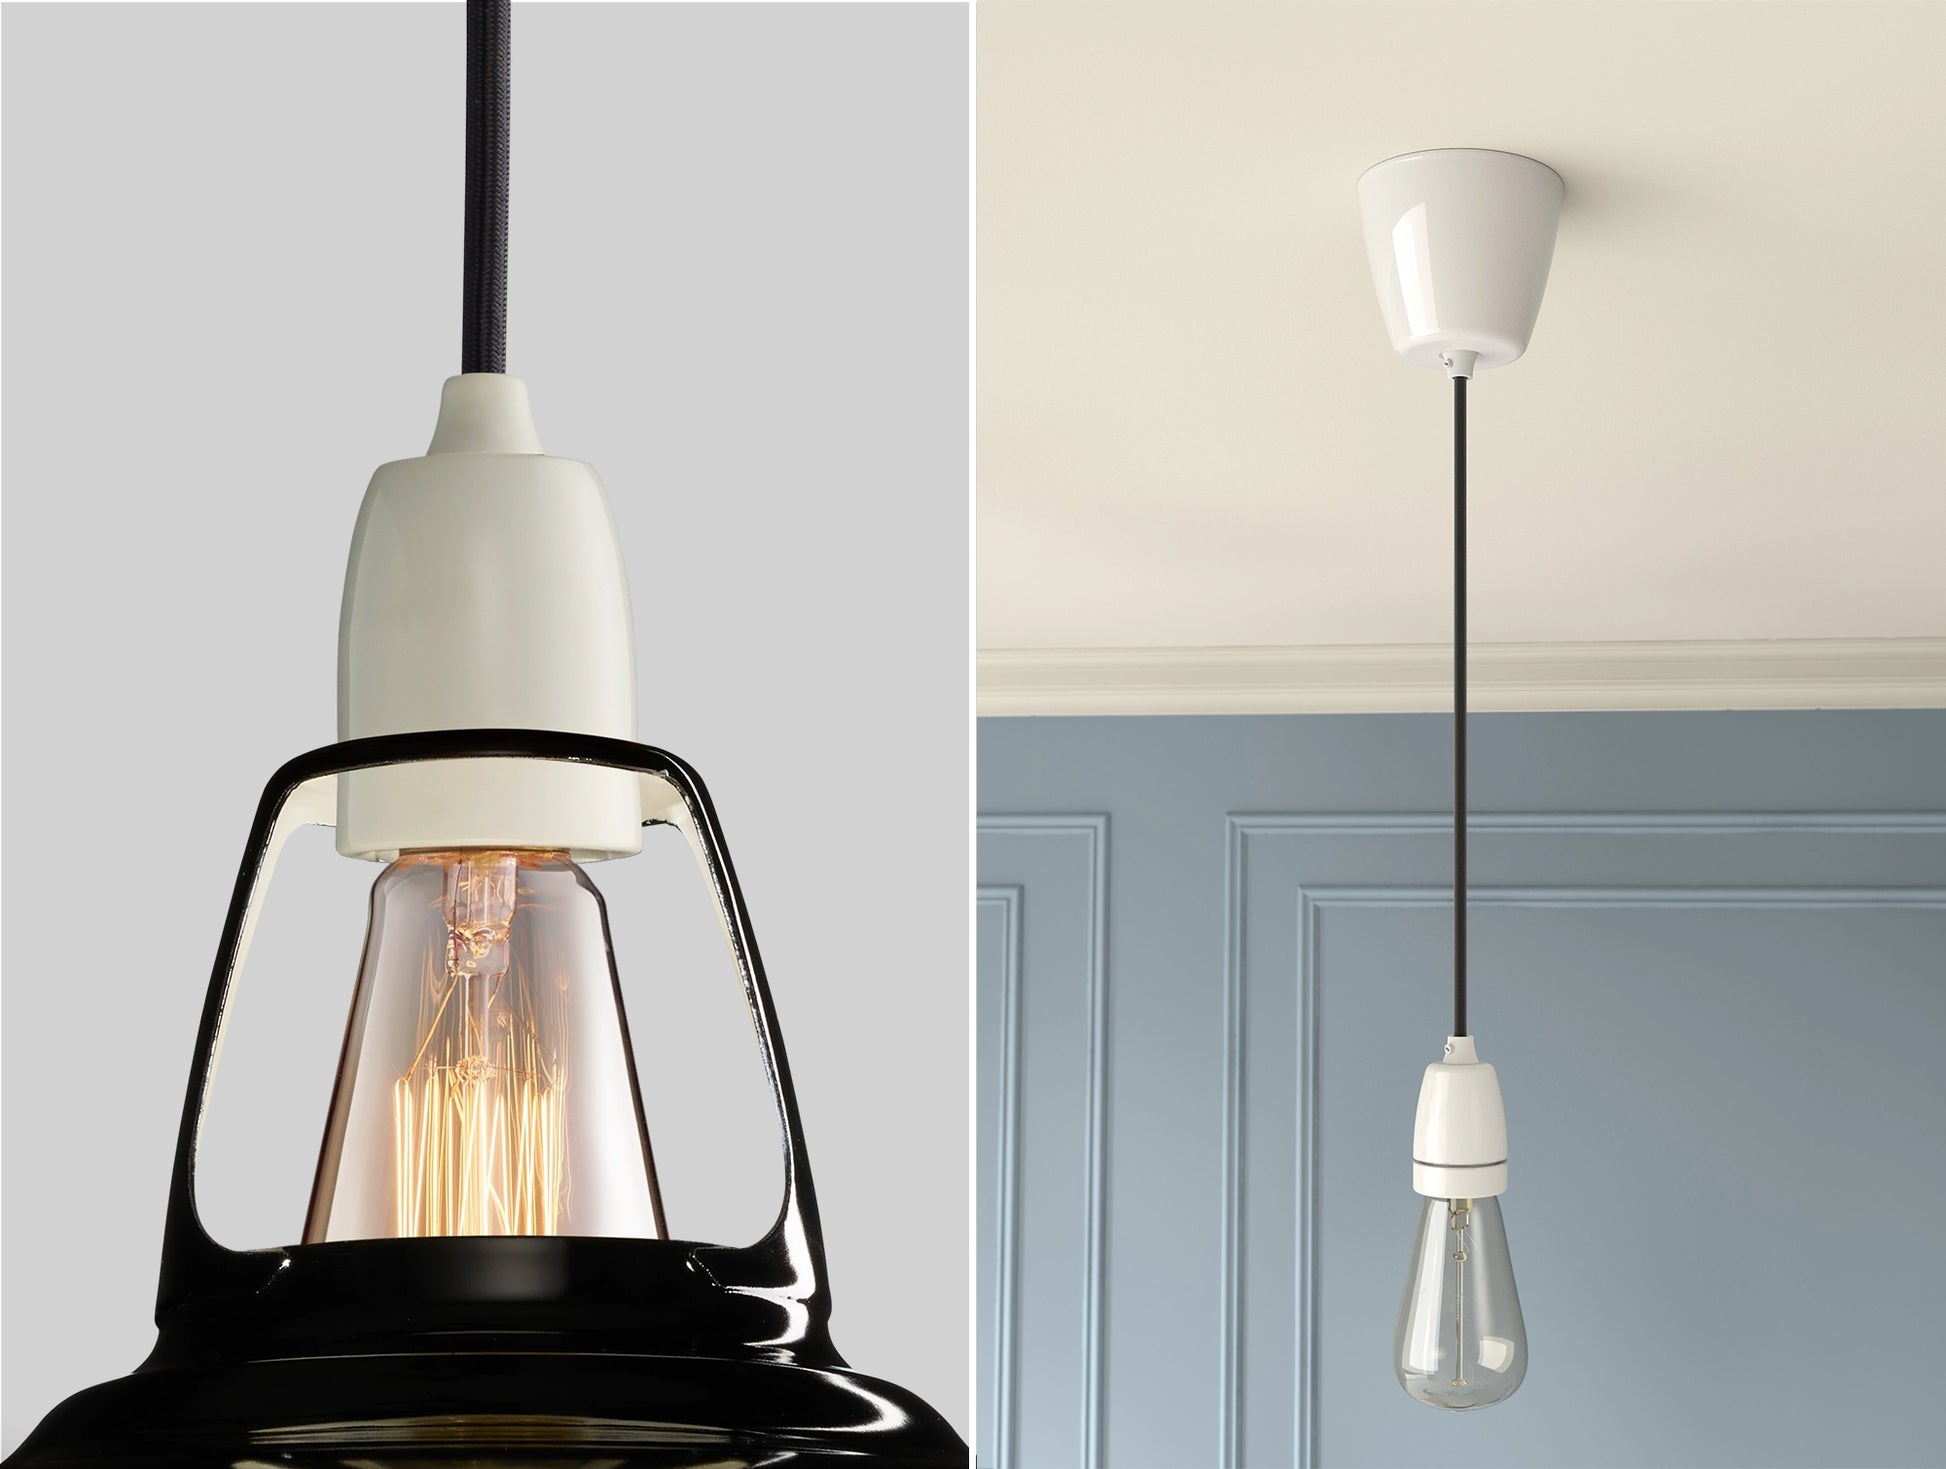 Close up of an E27 Porcelain suspension set on a Northern Line Black lampshade on the left. On the right, an E27 Porcelain pendant set with a lightbulb is hanging from the ceiling